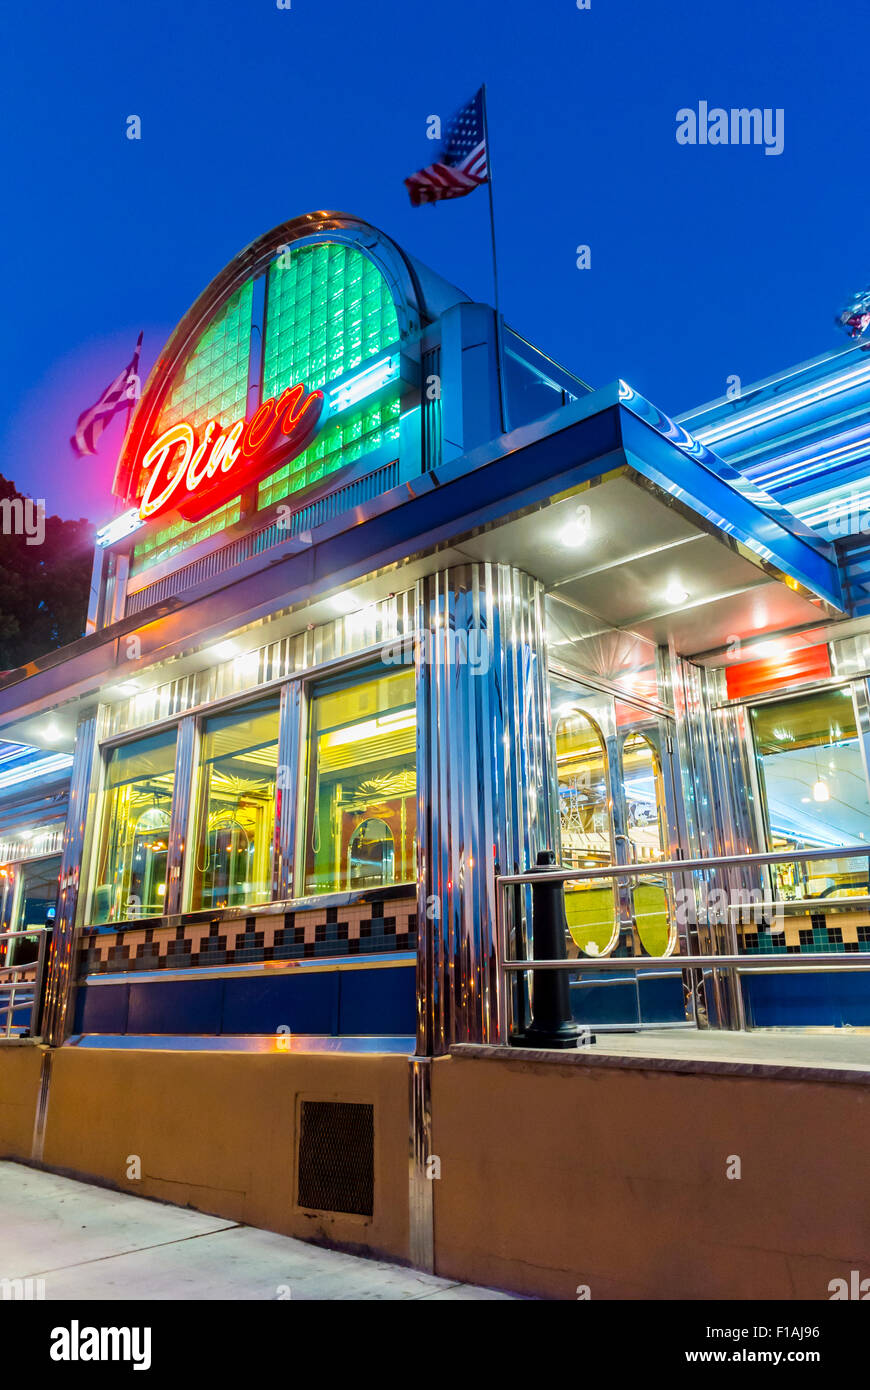 New York City, USA, Old American Bistro Restaurant Vintage Diner in  Brooklyn, Lit up at Night Stock Photo - Alamy